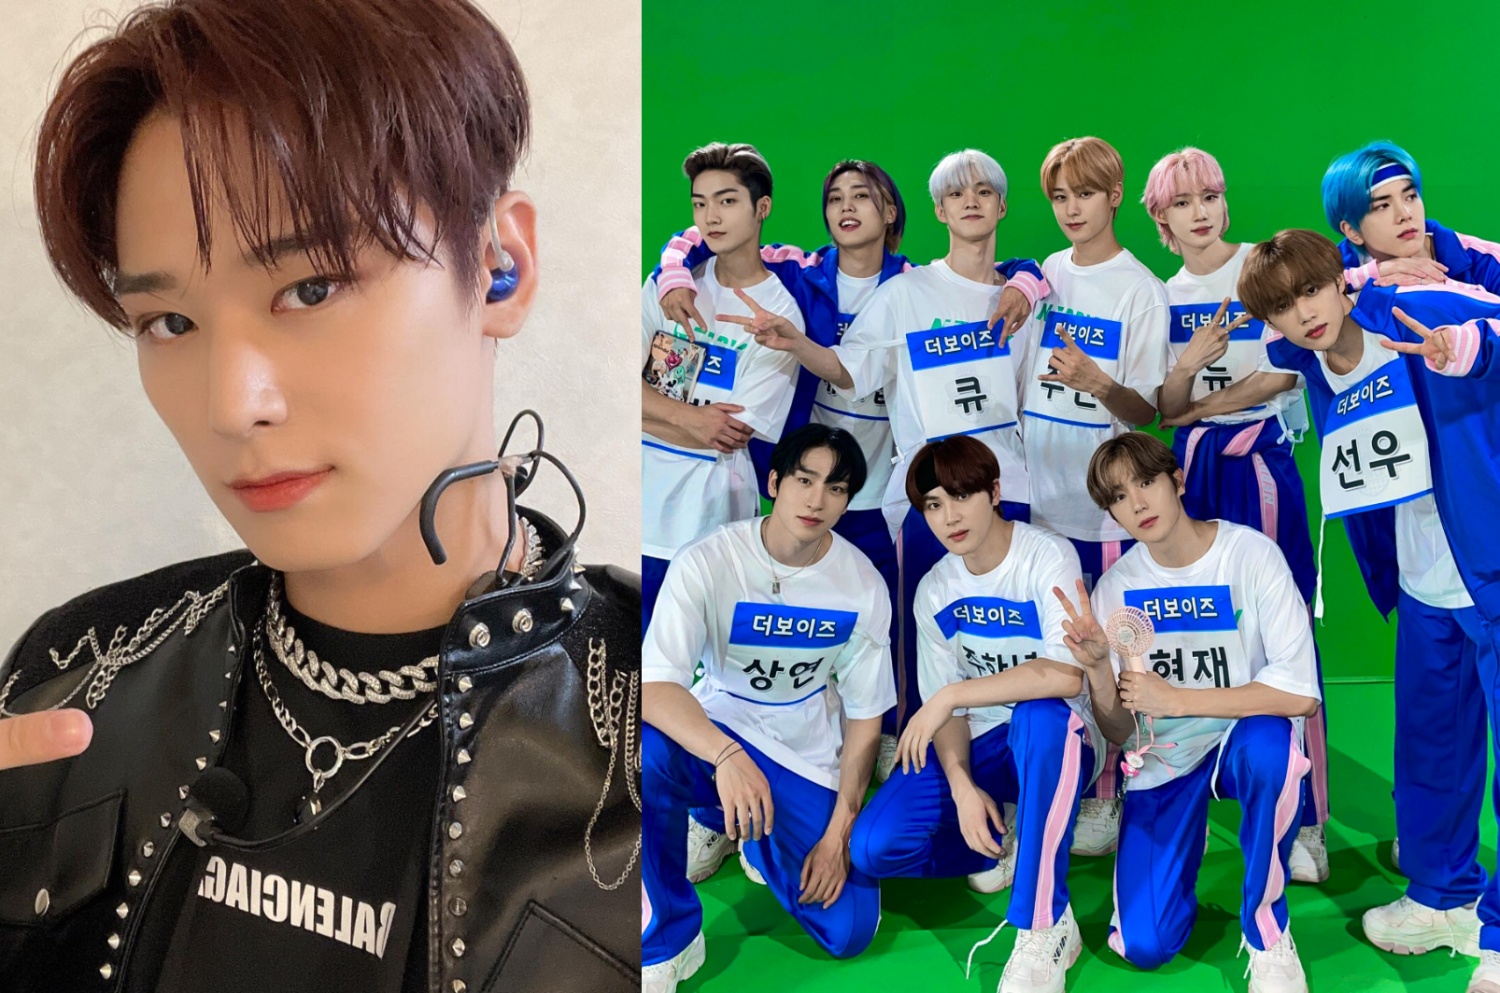 Boyz Juyeon is praised but other members are criticized + B Slams staff